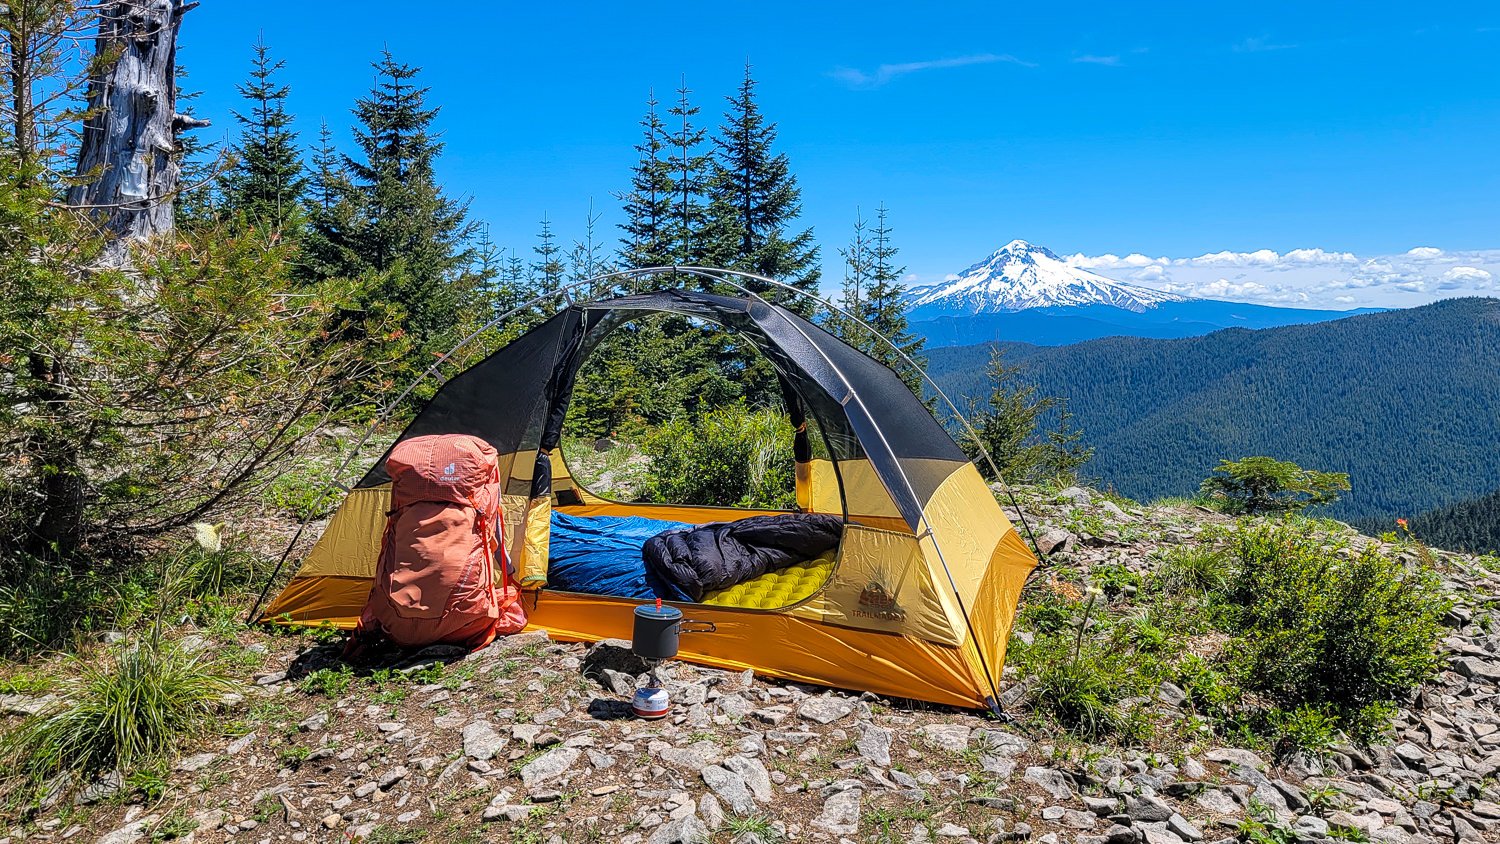 The REI Trailmade 2 tent set up for camping on a high ridge with Mount Hood in the background